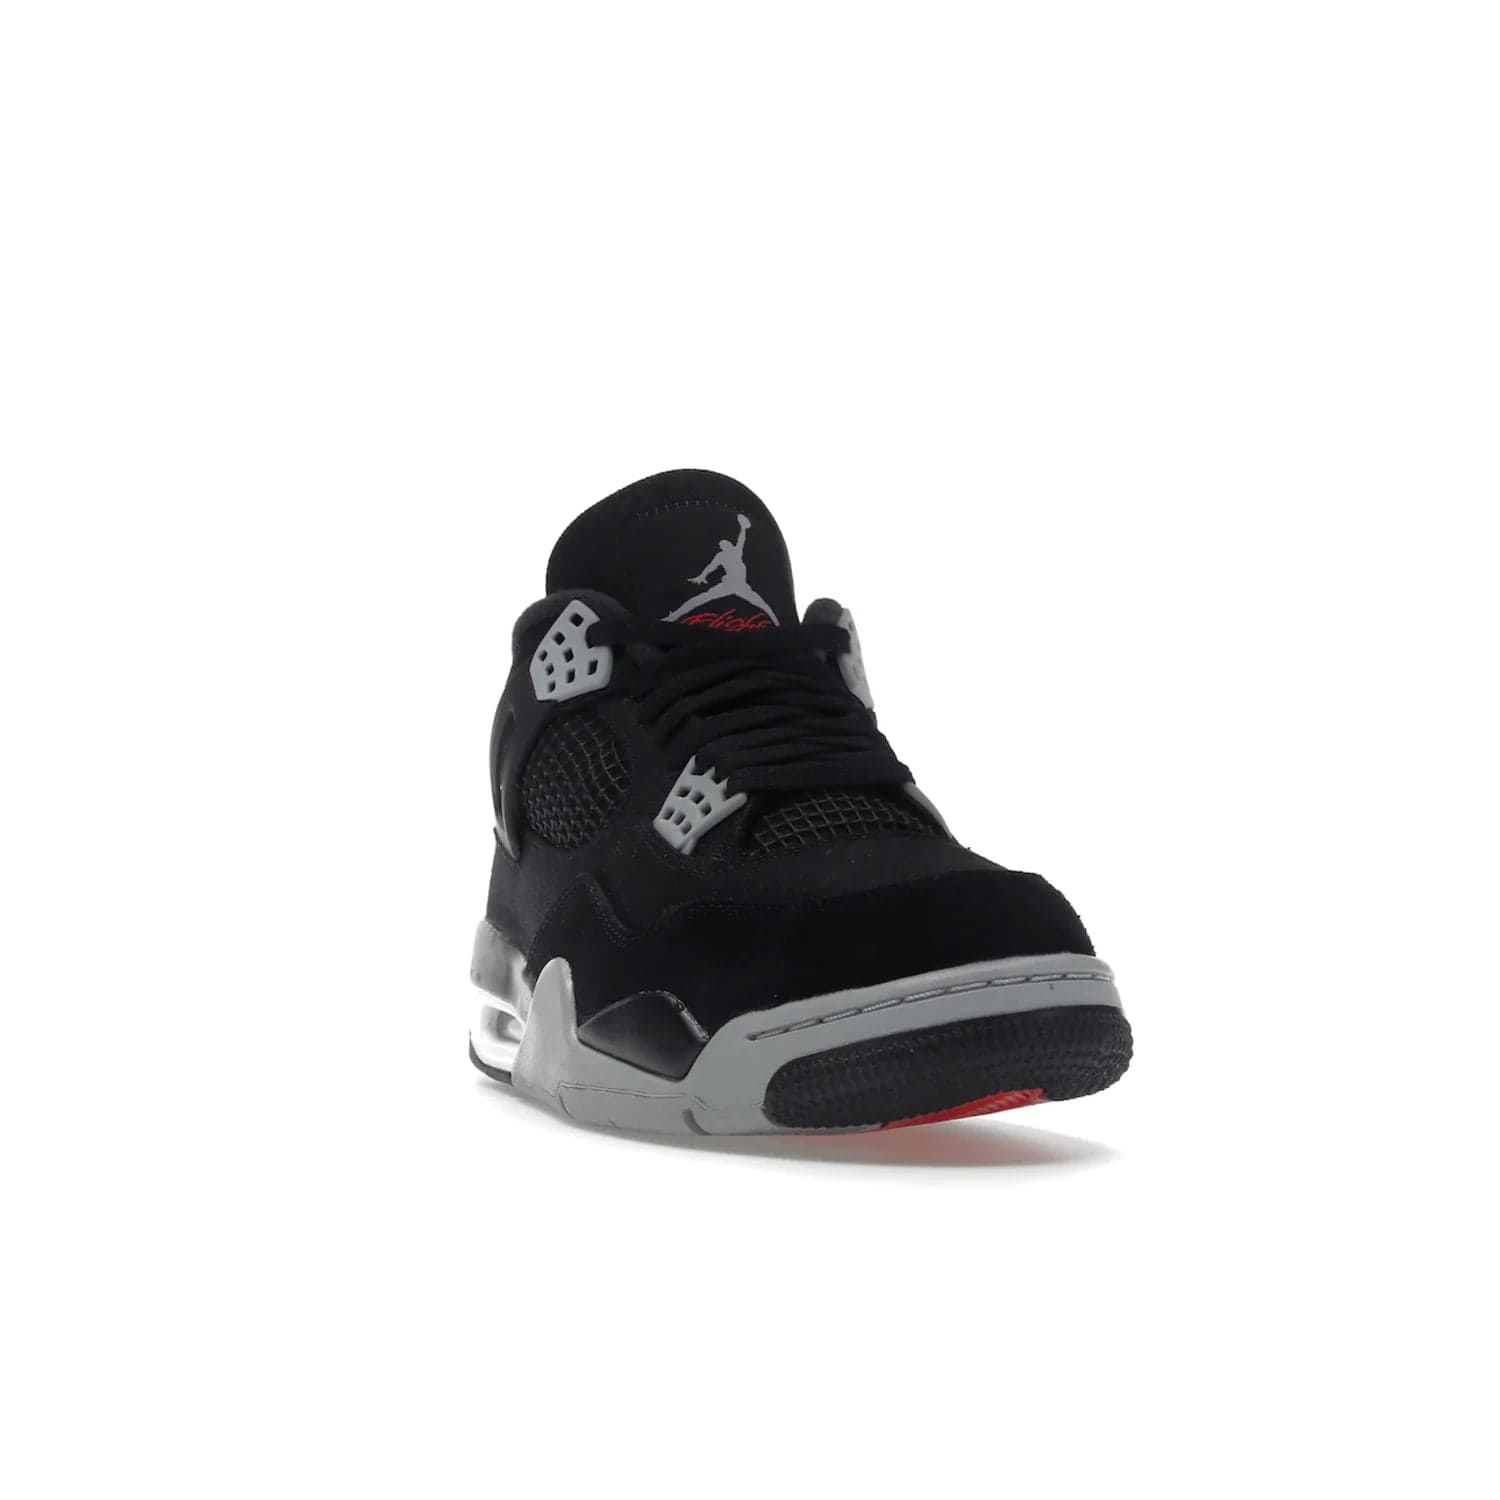 Jordan 4 Retro SE Black Canvas - Image 8 - Only at www.BallersClubKickz.com - The Air Jordan 4 Retro SE Black Canvas brings timeless style and modern luxury. Classic mid-top sneaker in black canvas and grey suede with tonal Jumpman logo, Flight logo and polyurethane midsole with visible Air-sole cushioning. Refresh your sneaker collection and rock the Air Jordan 4 Retro SE Black Canvas.